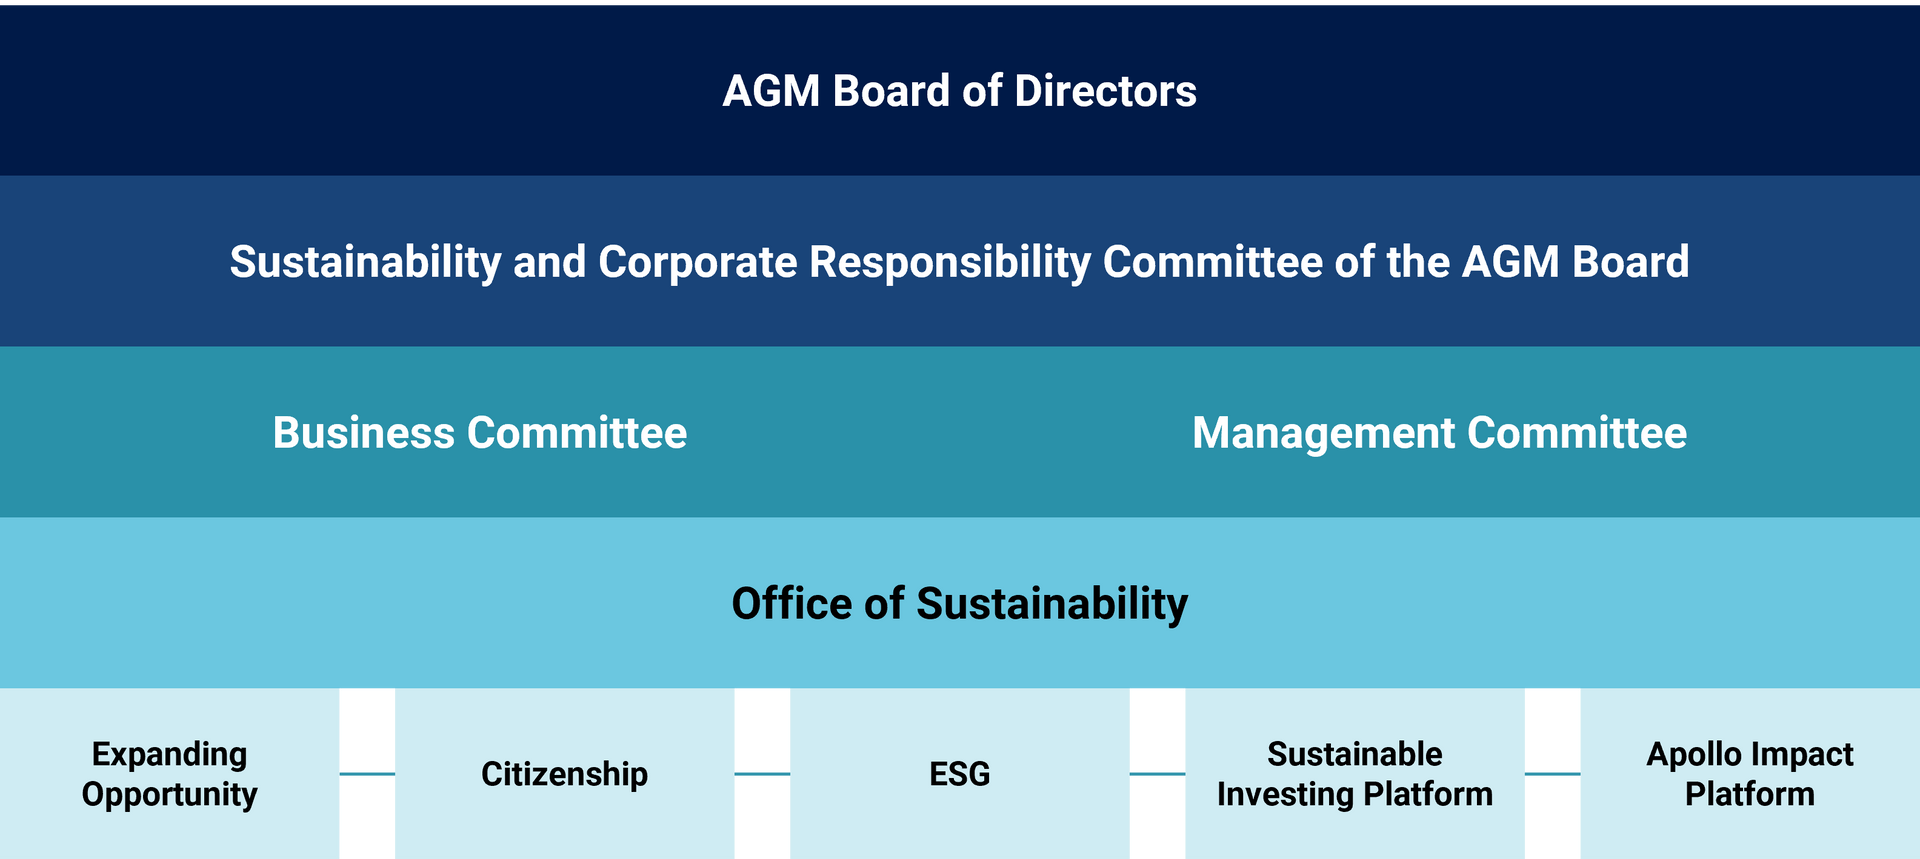 Sustainability ecosystem at Apollo; Apollo Global Management (AGM) Board of Directors; Sustainability and Corporate Responsibility Committee of the AGM Board; Business & Management Committees; Office of Sustainability; Expanding Opportunity, Citizenship, ESG, Sustainable Investing Platform, Apollo Impact Platform